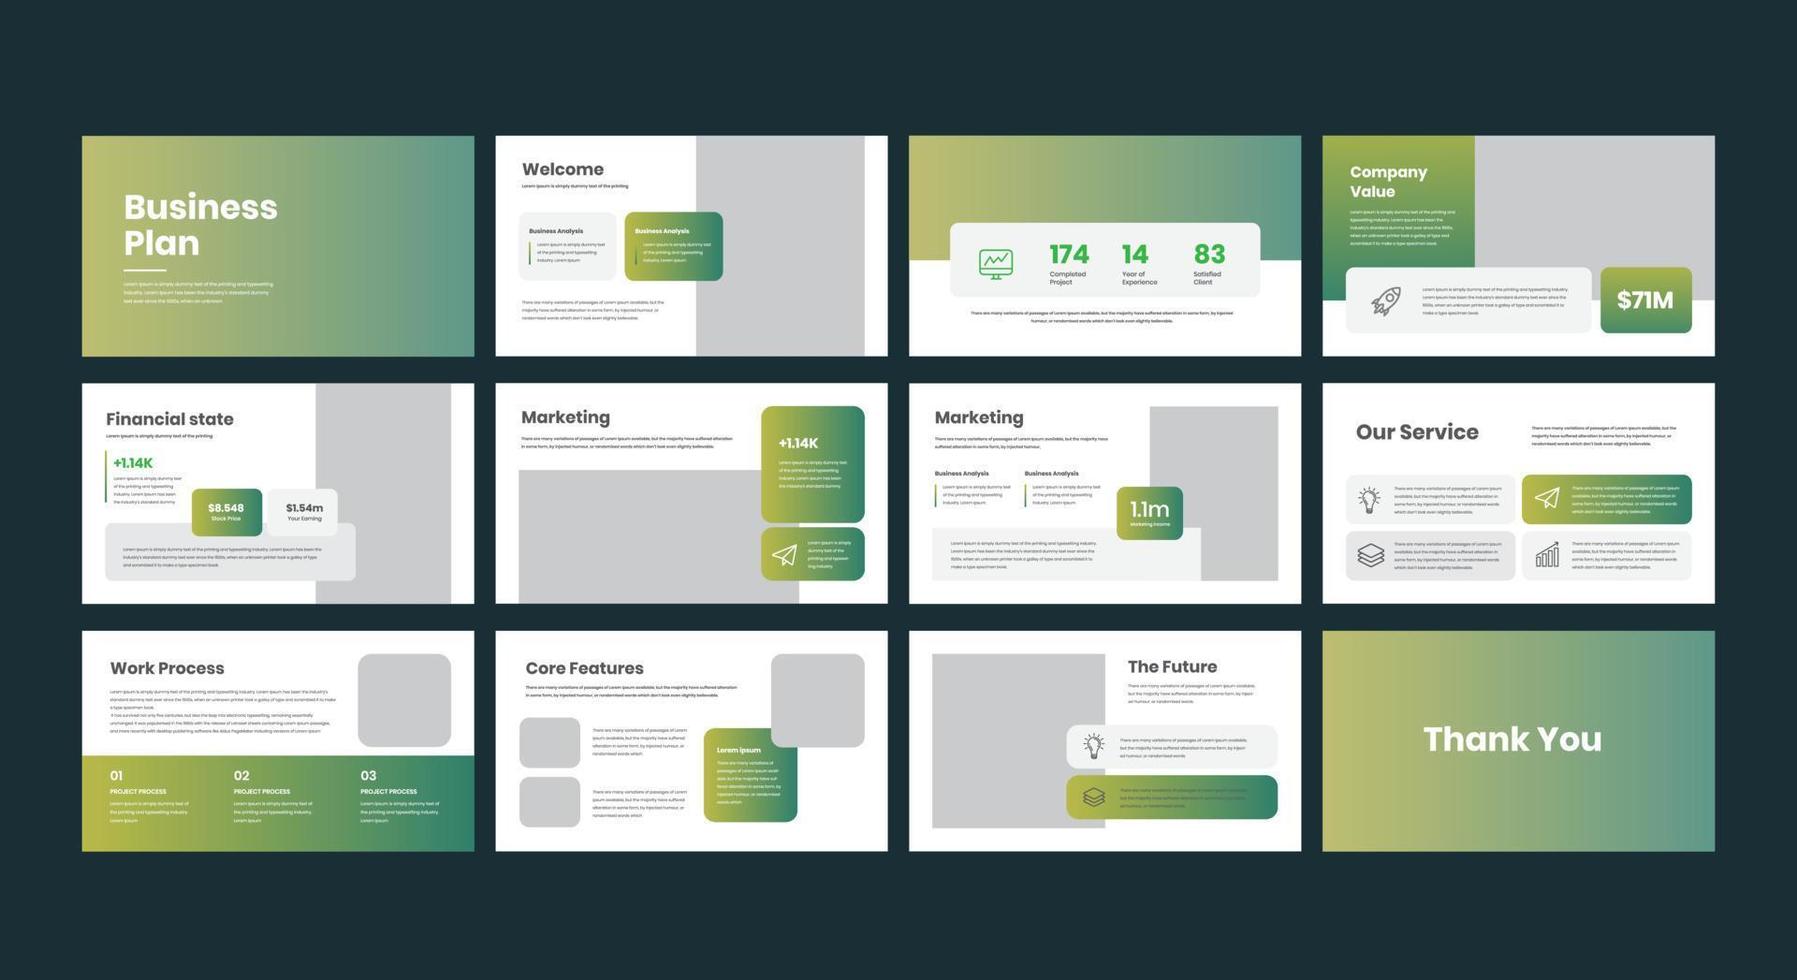 business presentation template design backgrounds and page layout design for brochure, book, magazine, annual report and company profile, with info graphic elements graph design concept vector